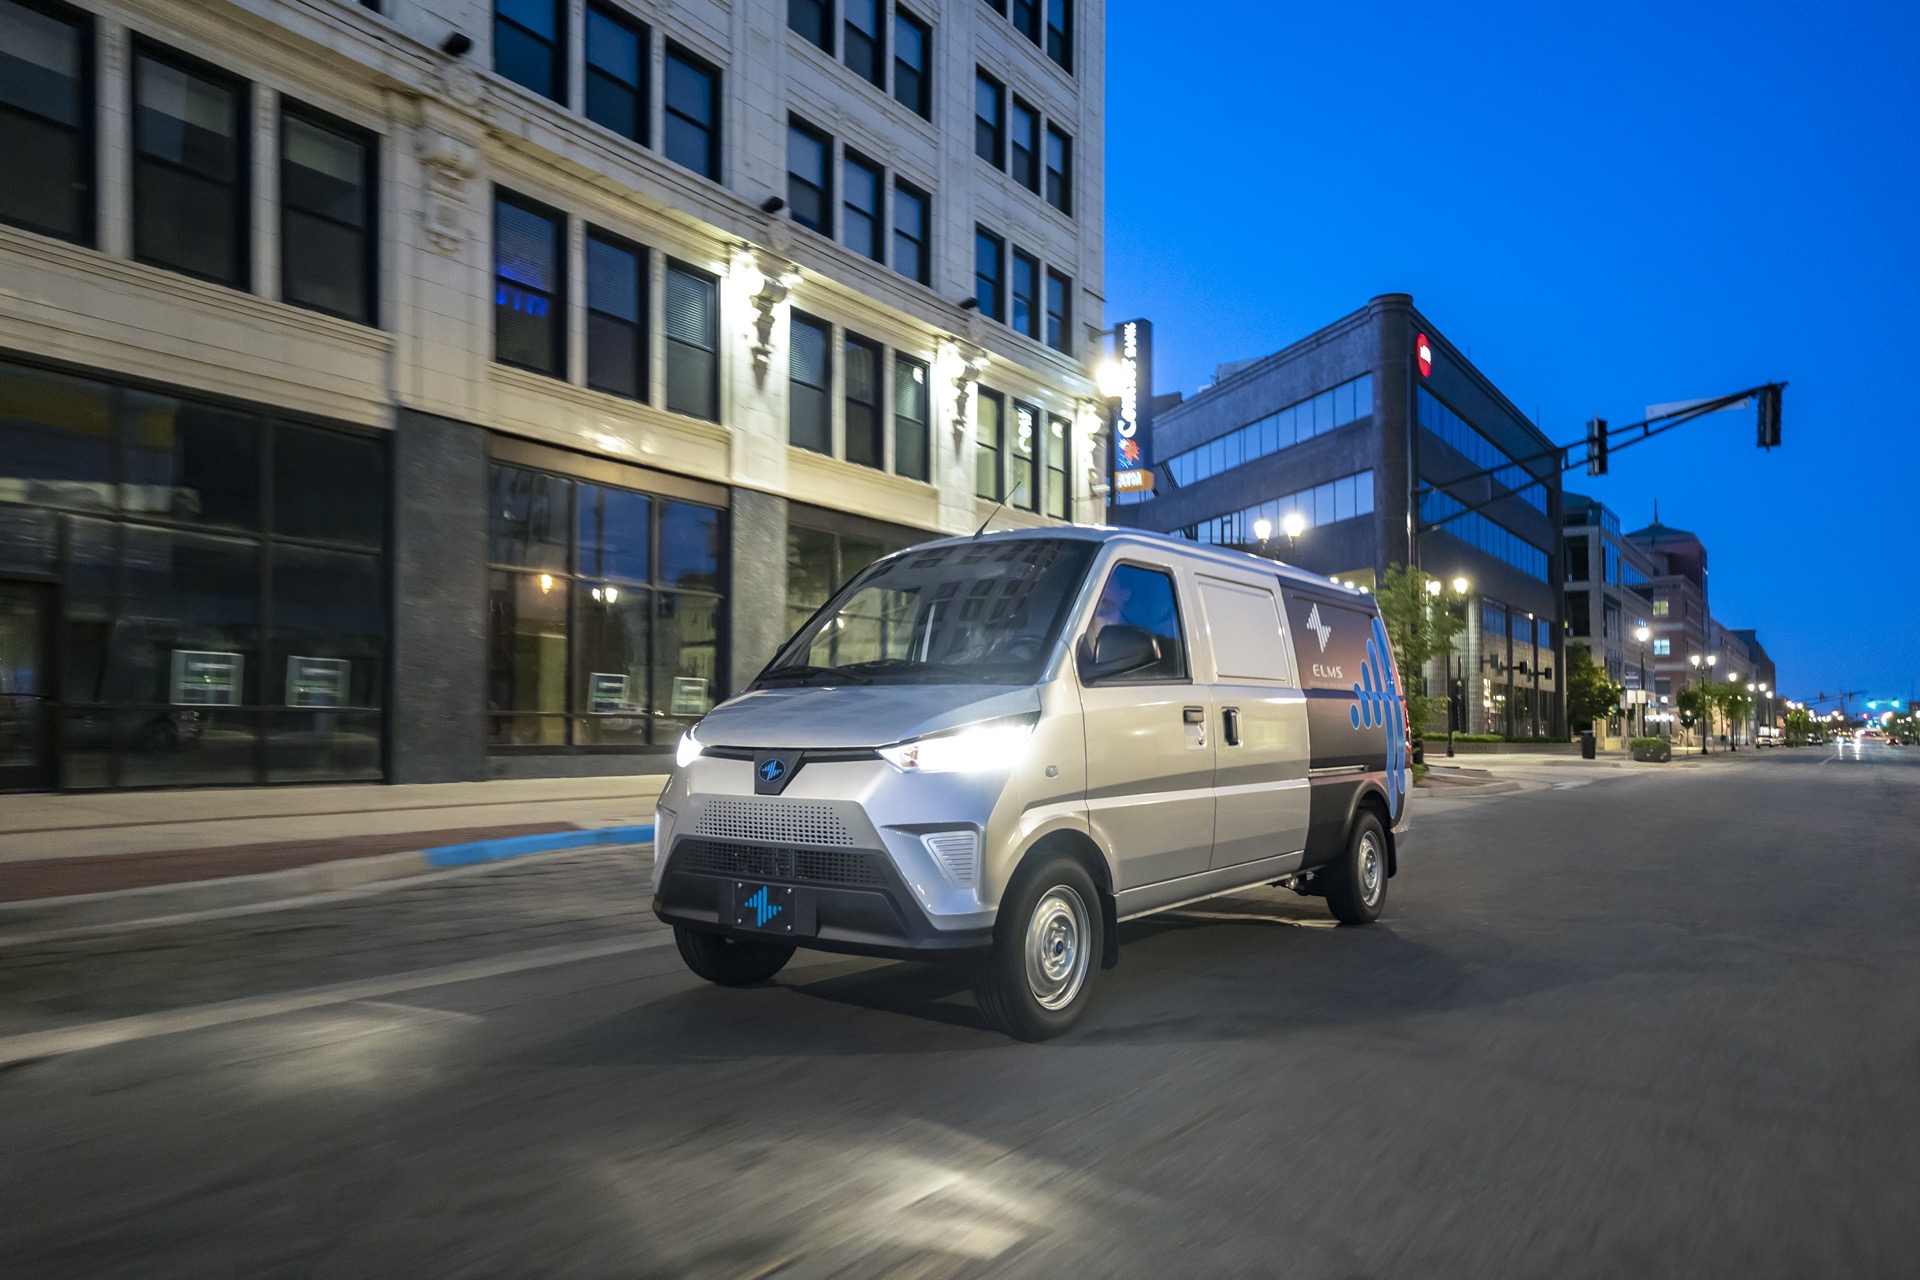 CATL cell-to-pack tech going into Indiana-built ELMS electric van, future battery swapping tooCATL cell-to-pack tech going into Indiana-built ELMS electric van, future battery swapping too